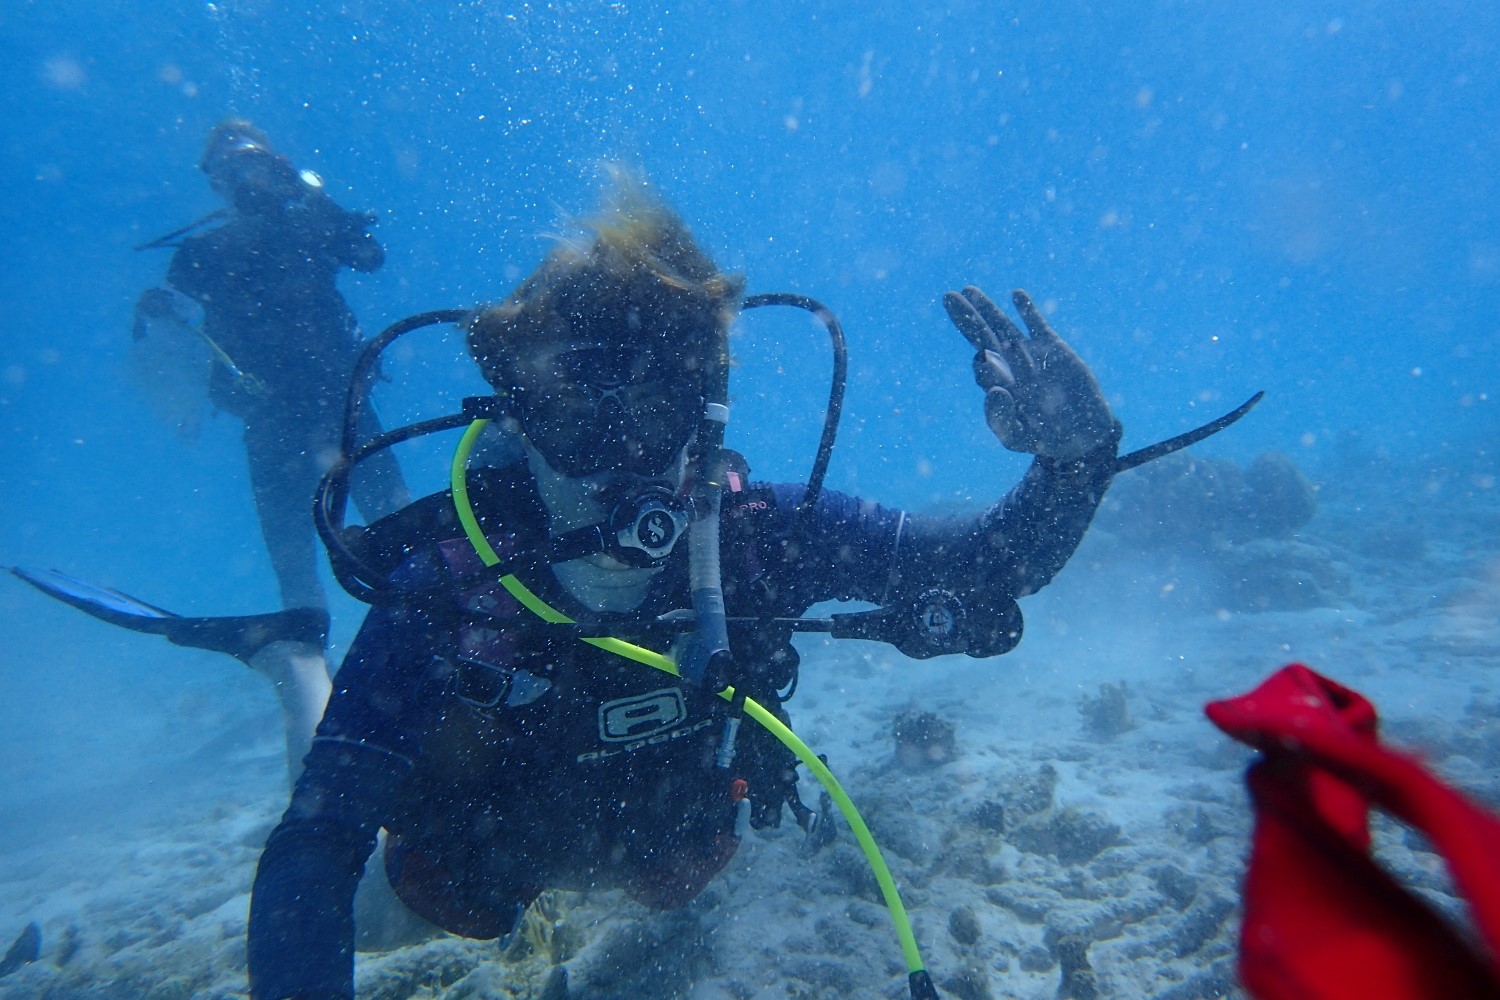 Dr. Hurt wearing snorkeling equipment in waters off Curacao